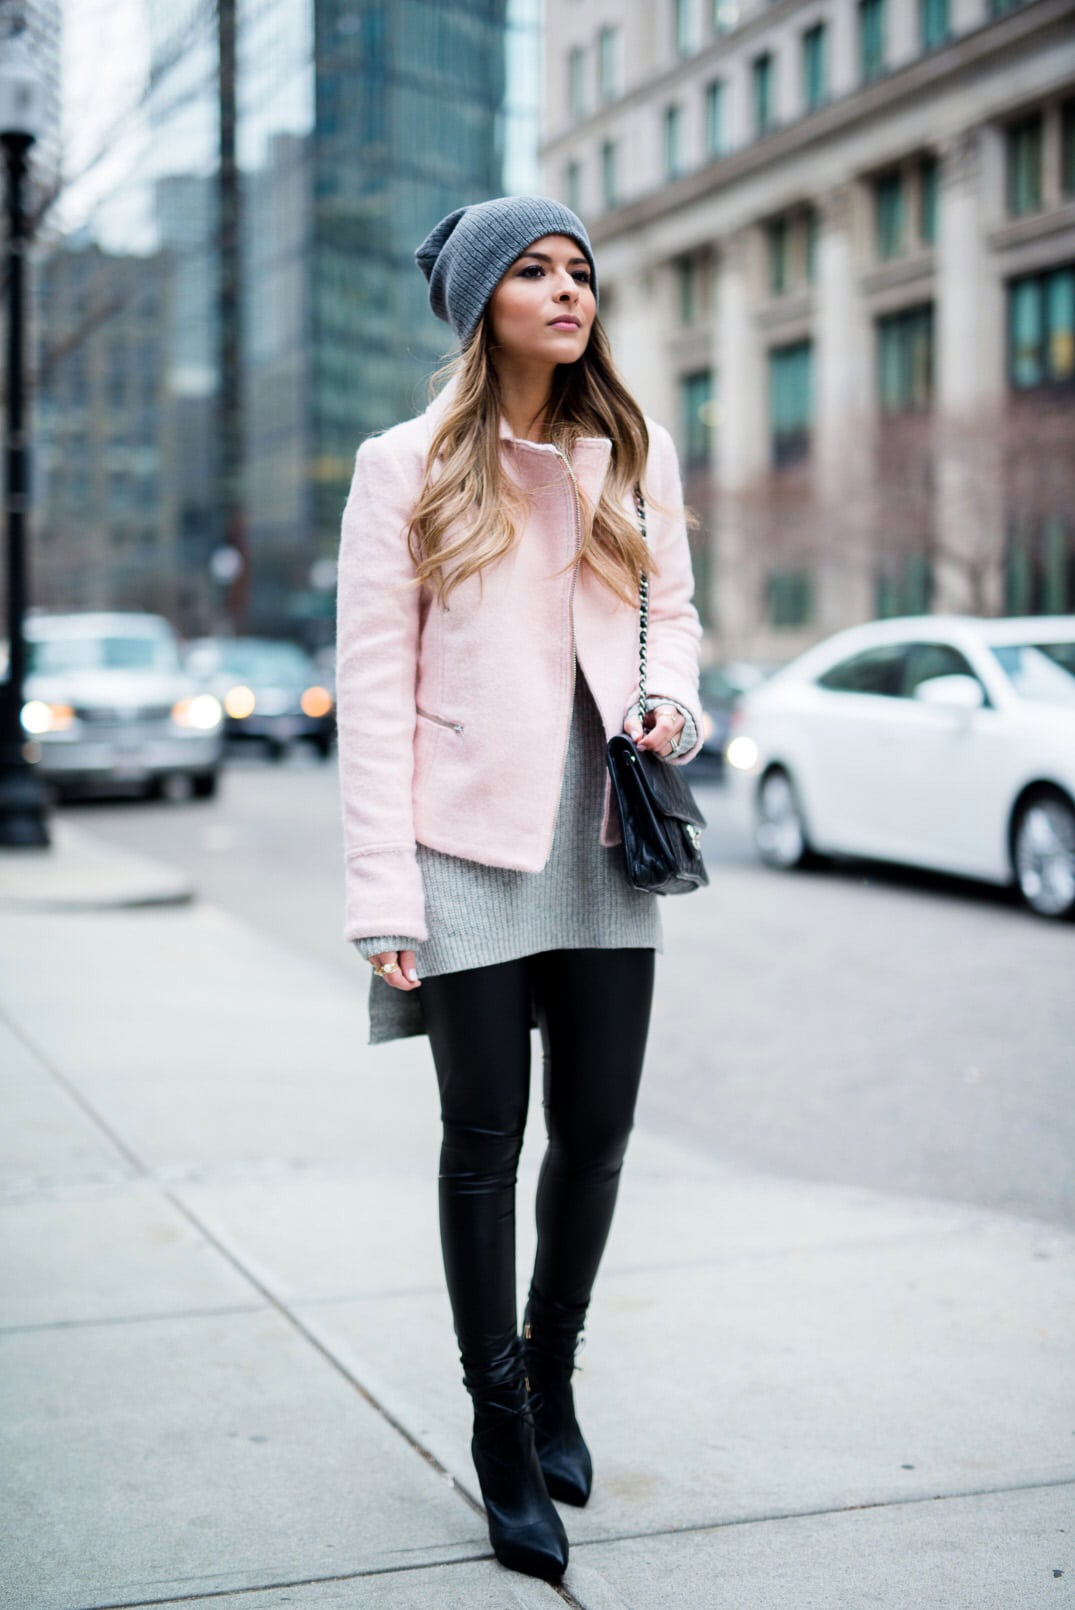 Asos Pink Jacket, Faux Leather Leggings, Reiss Boots, BP Grey Beanie,  Chanel French Riviera Flap, Grey Sweater, Boston-3 - The Girl from Panama